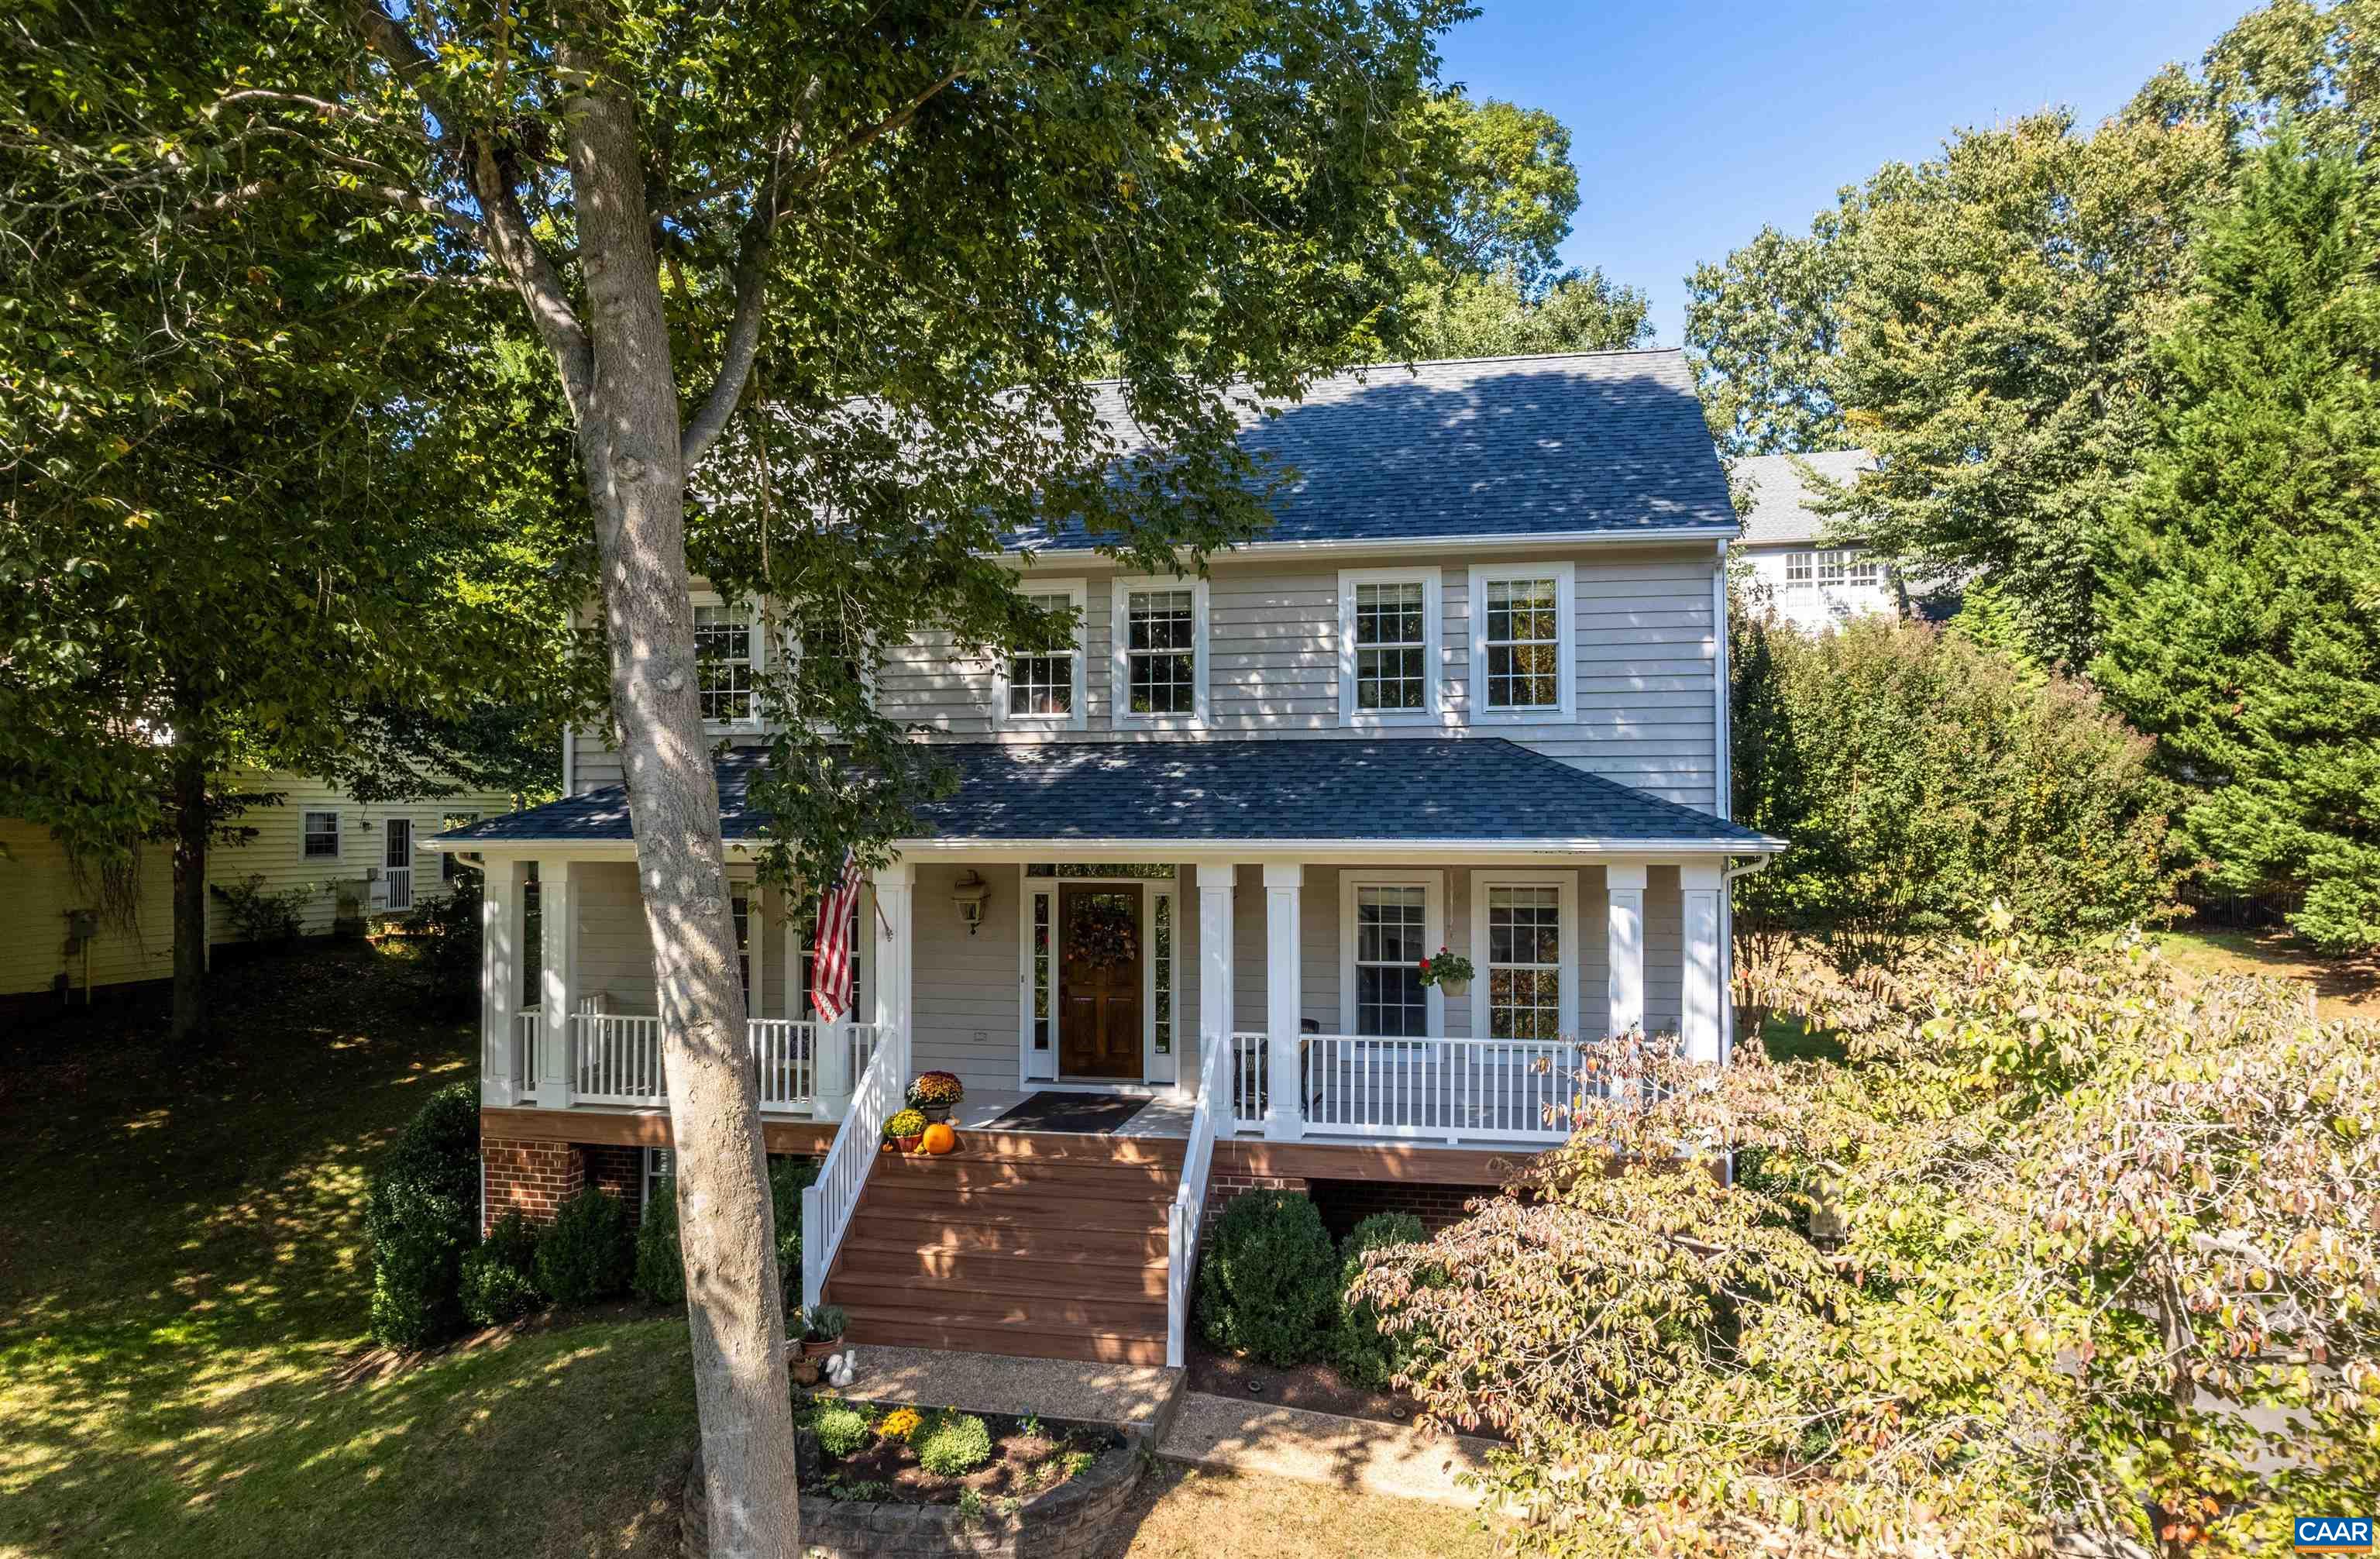 An incredible opportunity to buy a 3,000 sq. ft. Charlottesville home, walkable to downtown, completely furnished and giving a cozy feeling of comfort, warmth and privacy.  Located on a secluded horseshoe street with no pass-by traffic, this home is traditional with the finest of customization, craftsmanship and furnishings.  Custom oak - and reclaimed 100 year-old cedar – cabinets, wainscoting, doors, and trim.  Absolutely move in ready – leather furniture, antiques, oriental rugs, great room combining kitchen and living space, beyond TOP-of-the-line kitchen, white oak paneled library/study, private dining room with huge oak sliding barn doors, private back deck/porch/yard, and garage with HVAC which can be a workout/playroom and/or car park.  An opportunity to buy a home like this fully furnished (right down to sheets, silverware, picture frames, cleaning supplies, etc.) is unheard of in the Charlottesville market and could not be replicated for the purchase price.